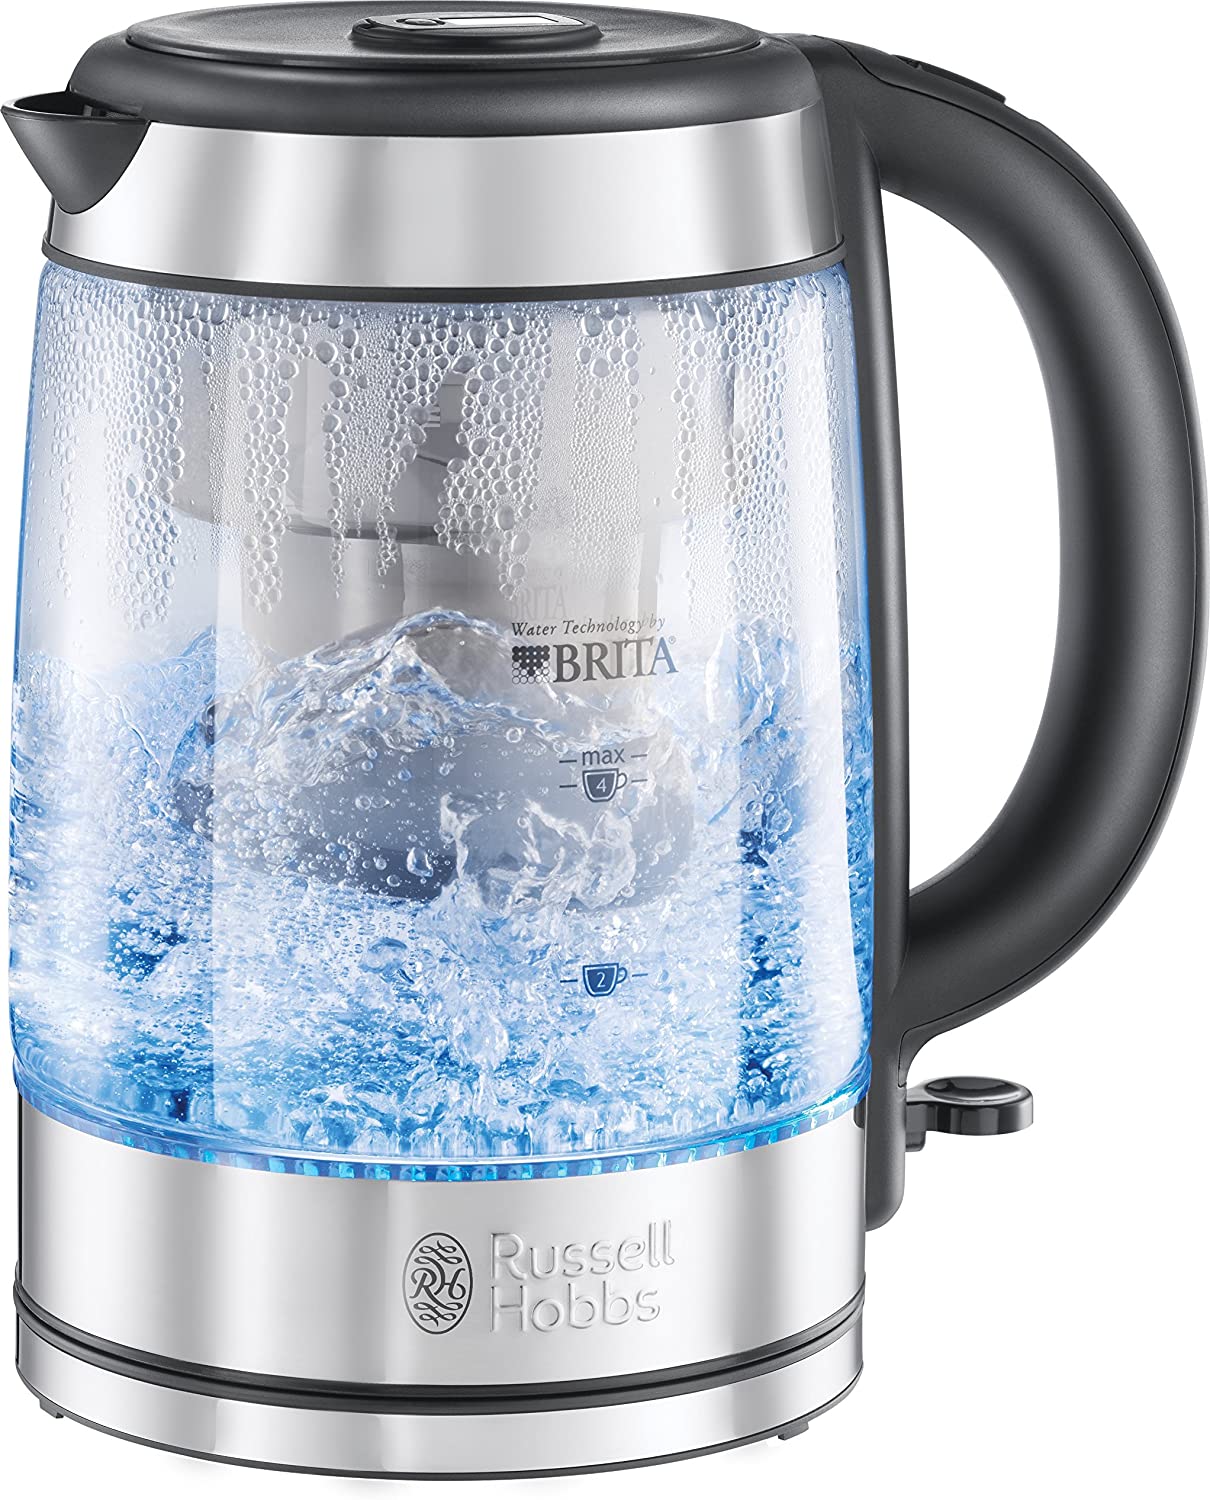 Russell Hobbs Kettle Glass [BRITA Water Filter MAXTRA+] 1.0 l + 0.5 l Filter Insert, 2200 W (LED Lighting, Free Filter Cartridge, Cartridge Change Indicator) Tea Kettle Limescale Filter Clarity 20760-57